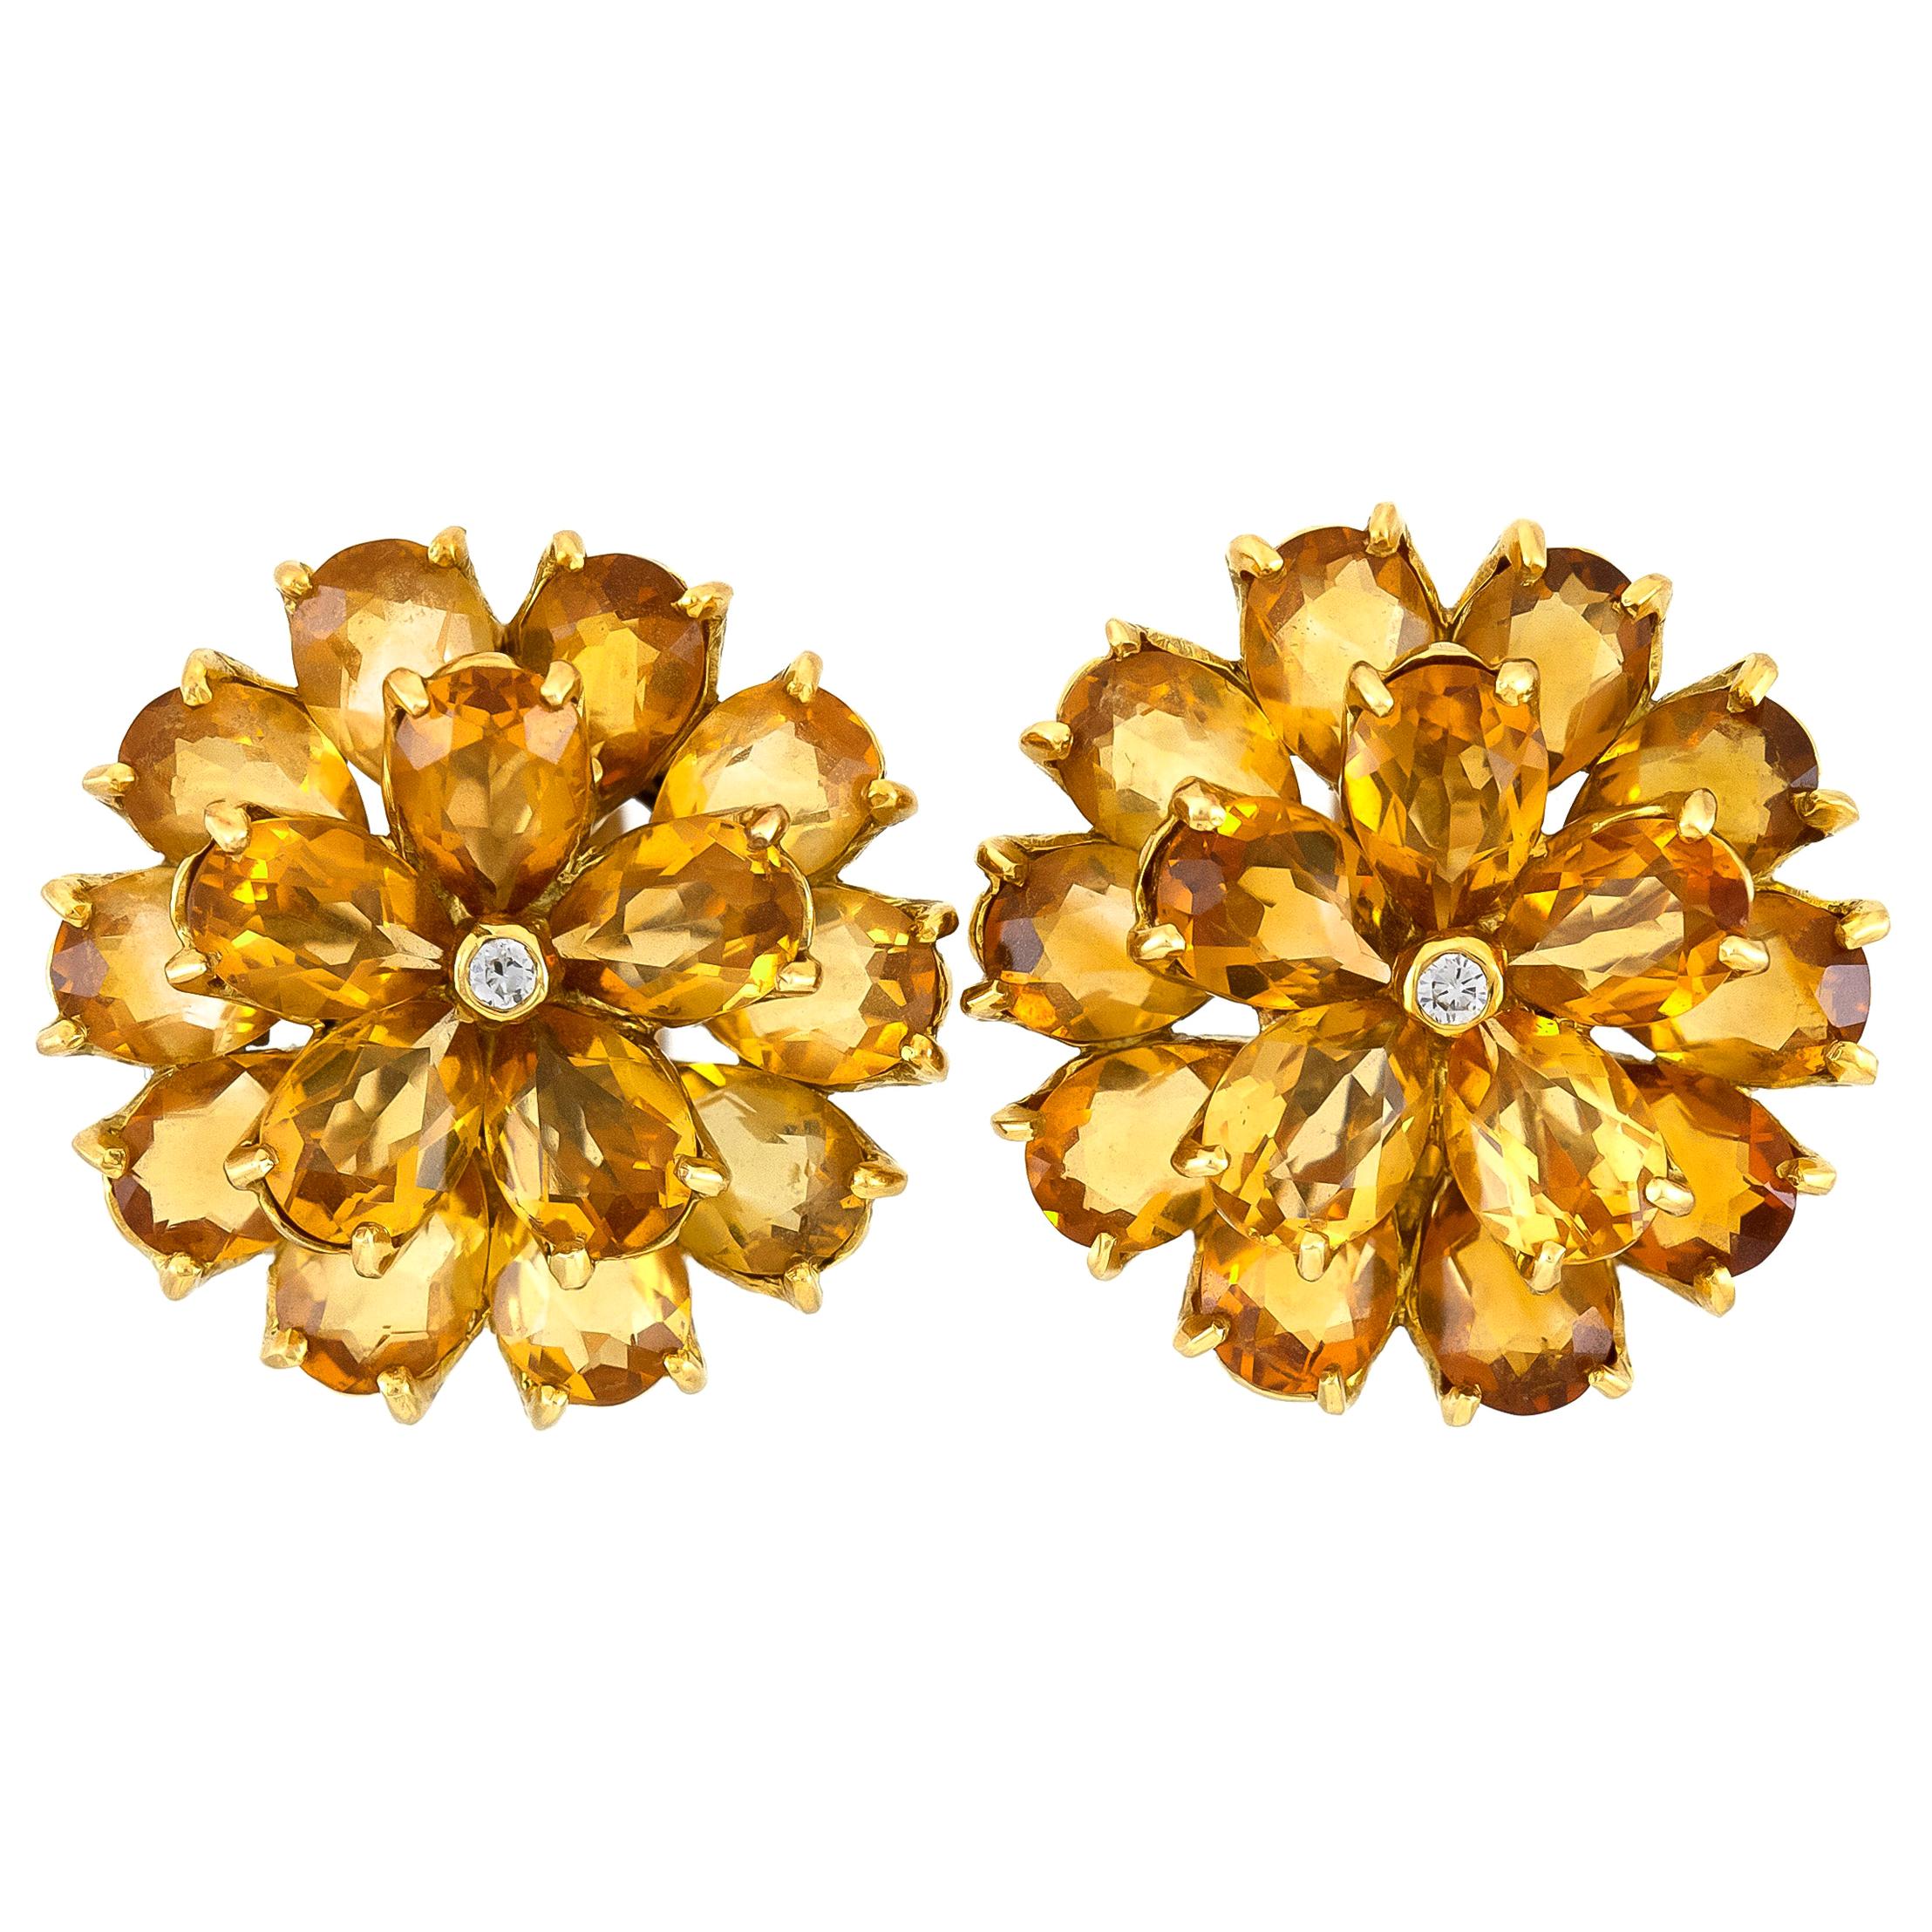 Tiffany & Co. with Citrine and Diamonds Earrings